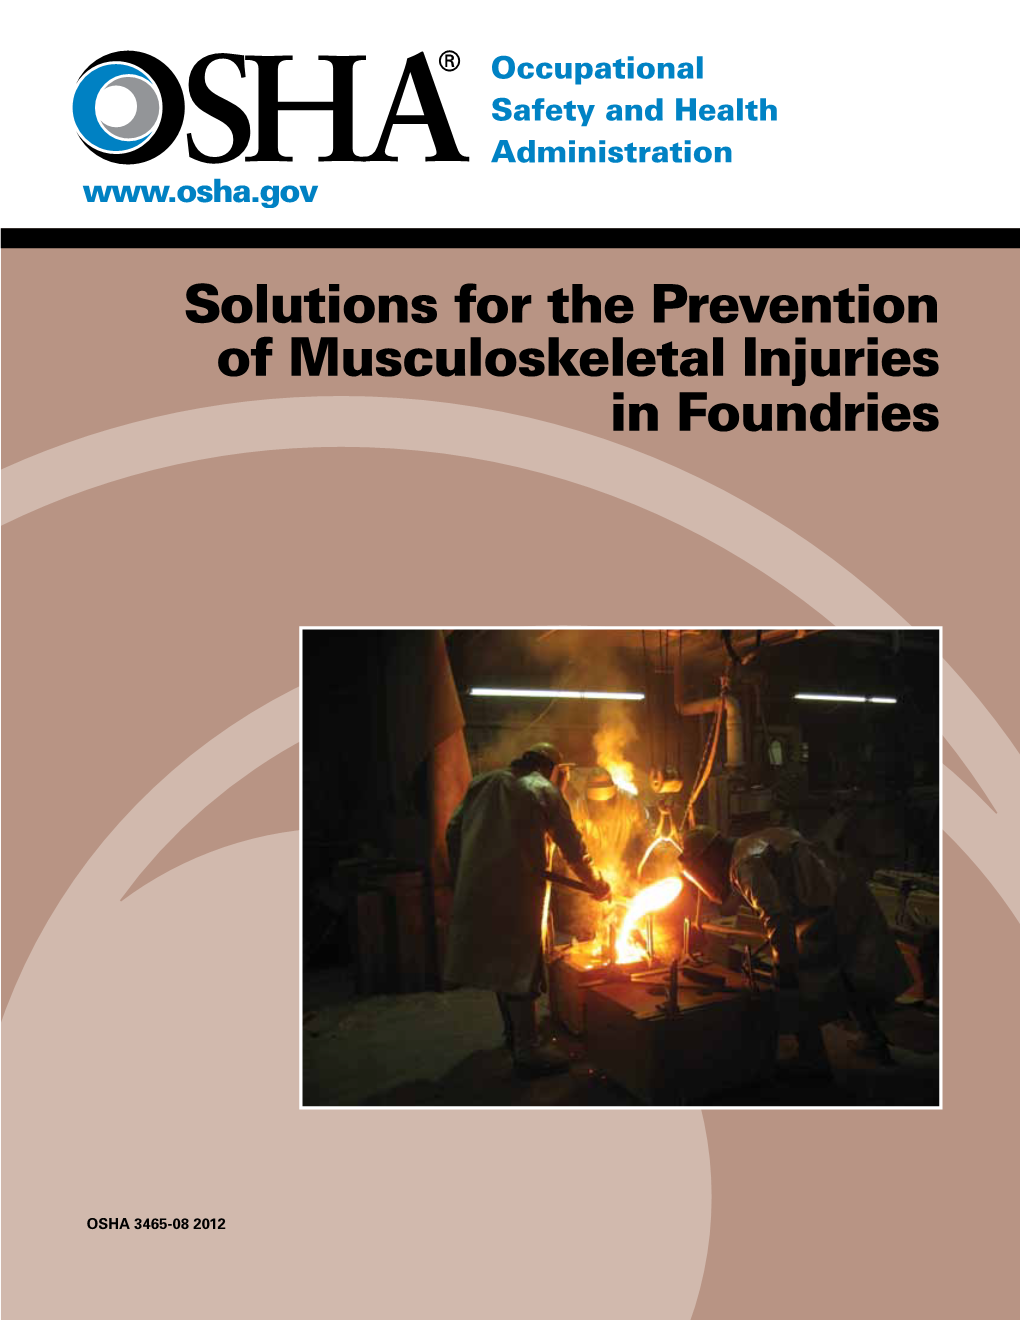 Solutions for the Prevention of Musculoskeletal Injuries in Foundries